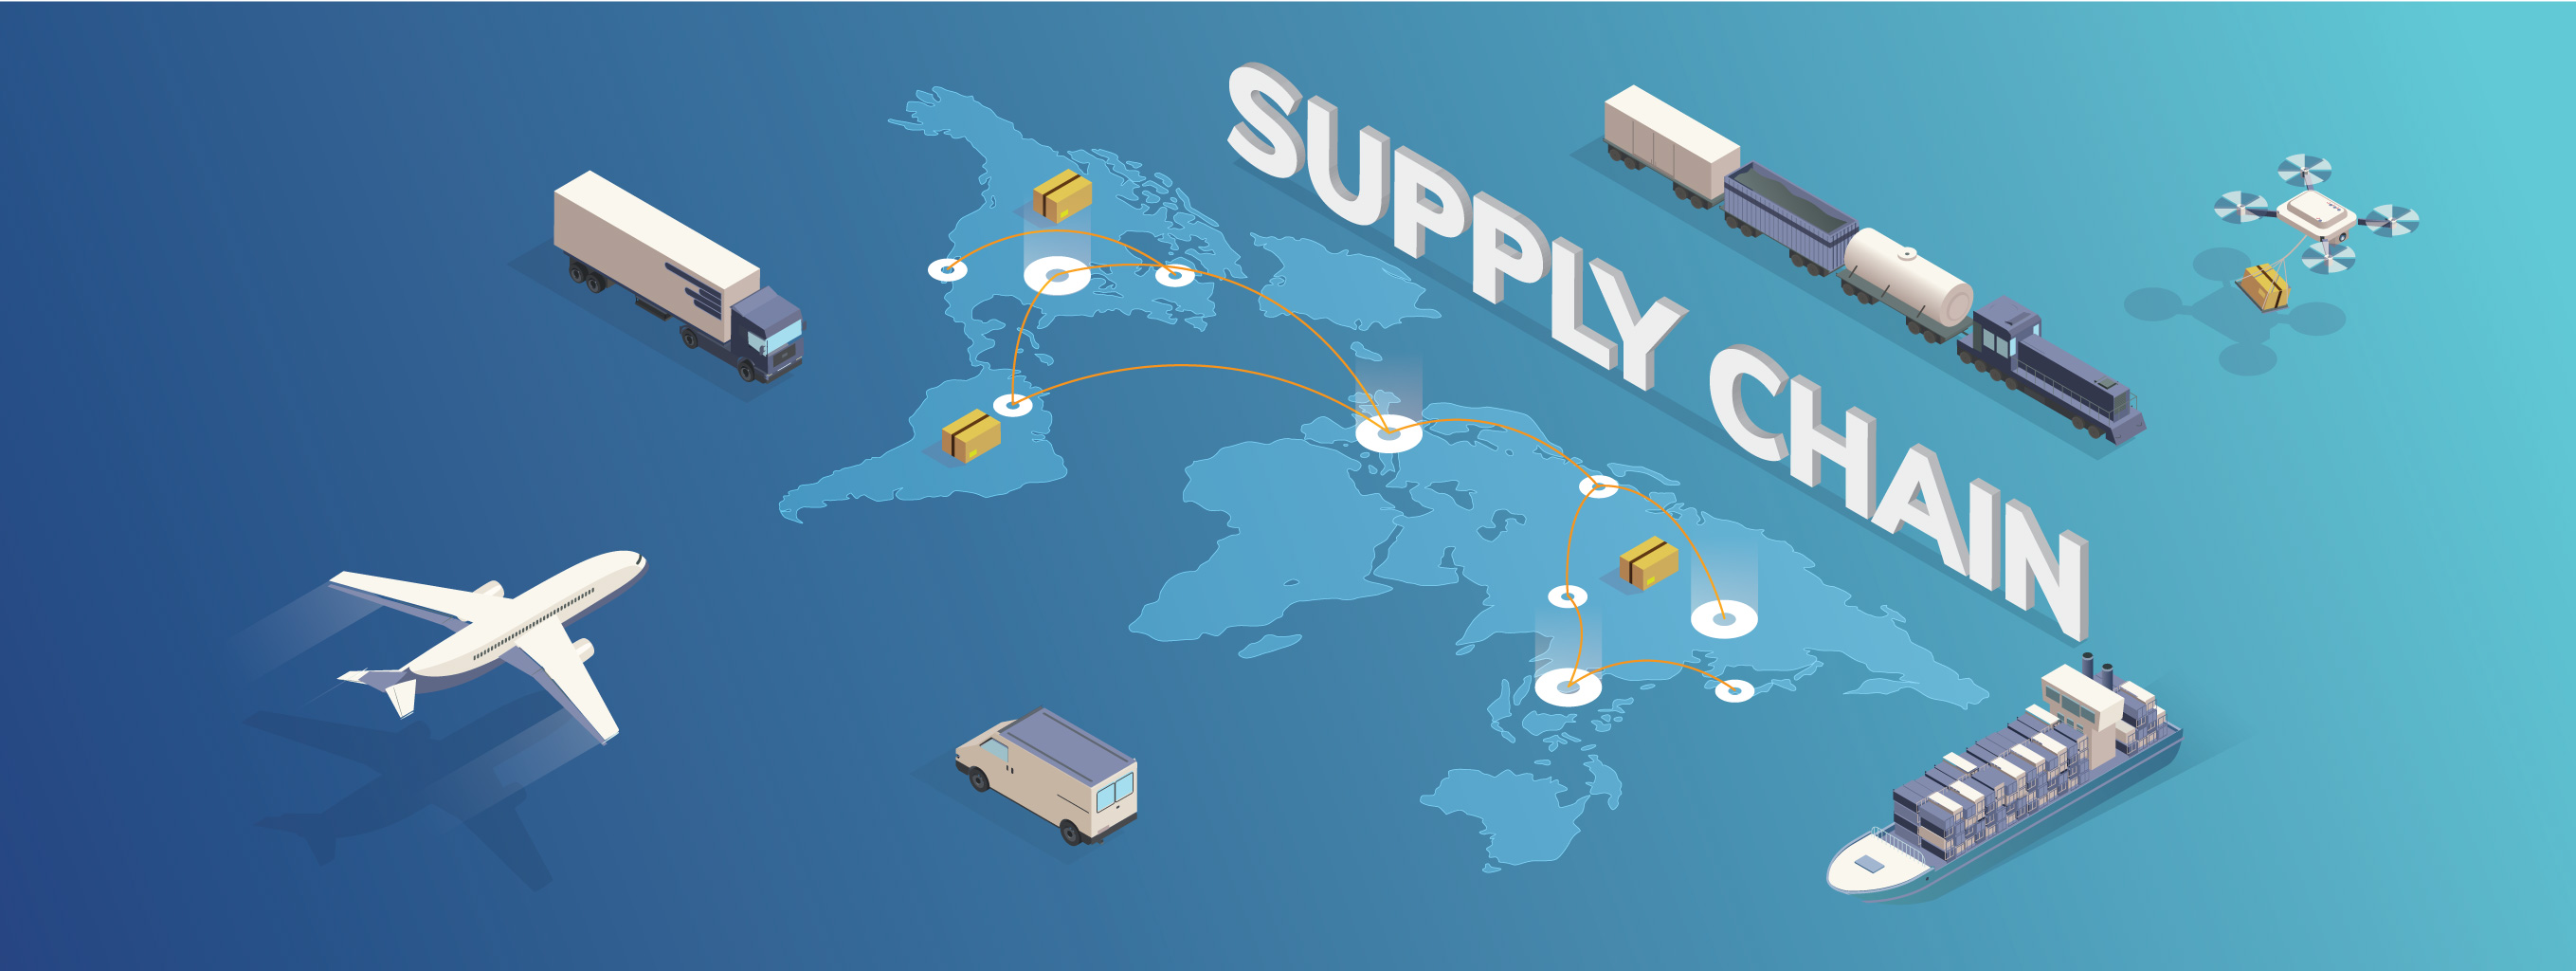 Visibility through data: A solution for Supply Chain